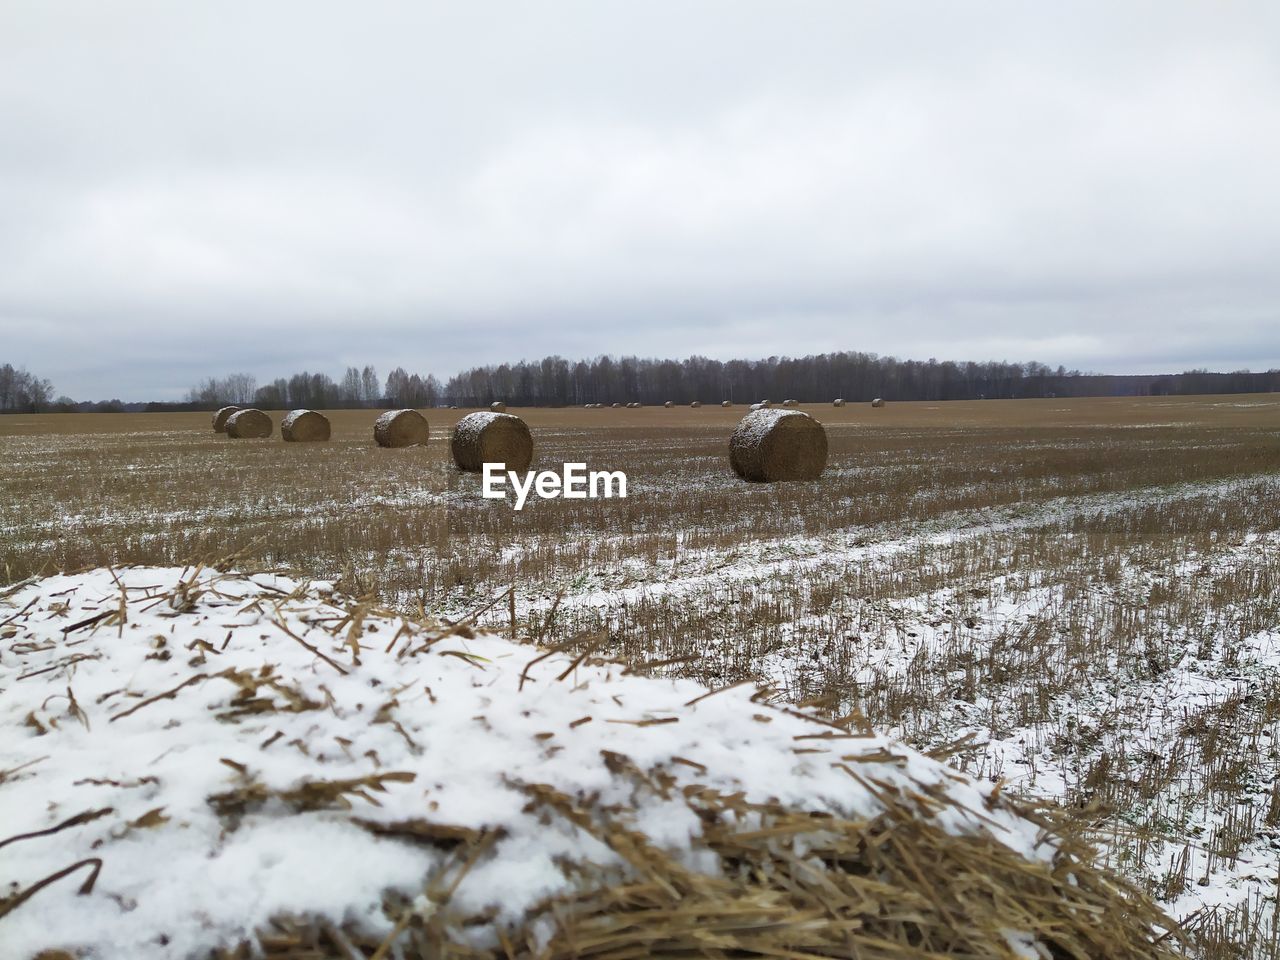 HAY BALES ON FIELD DURING WINTER